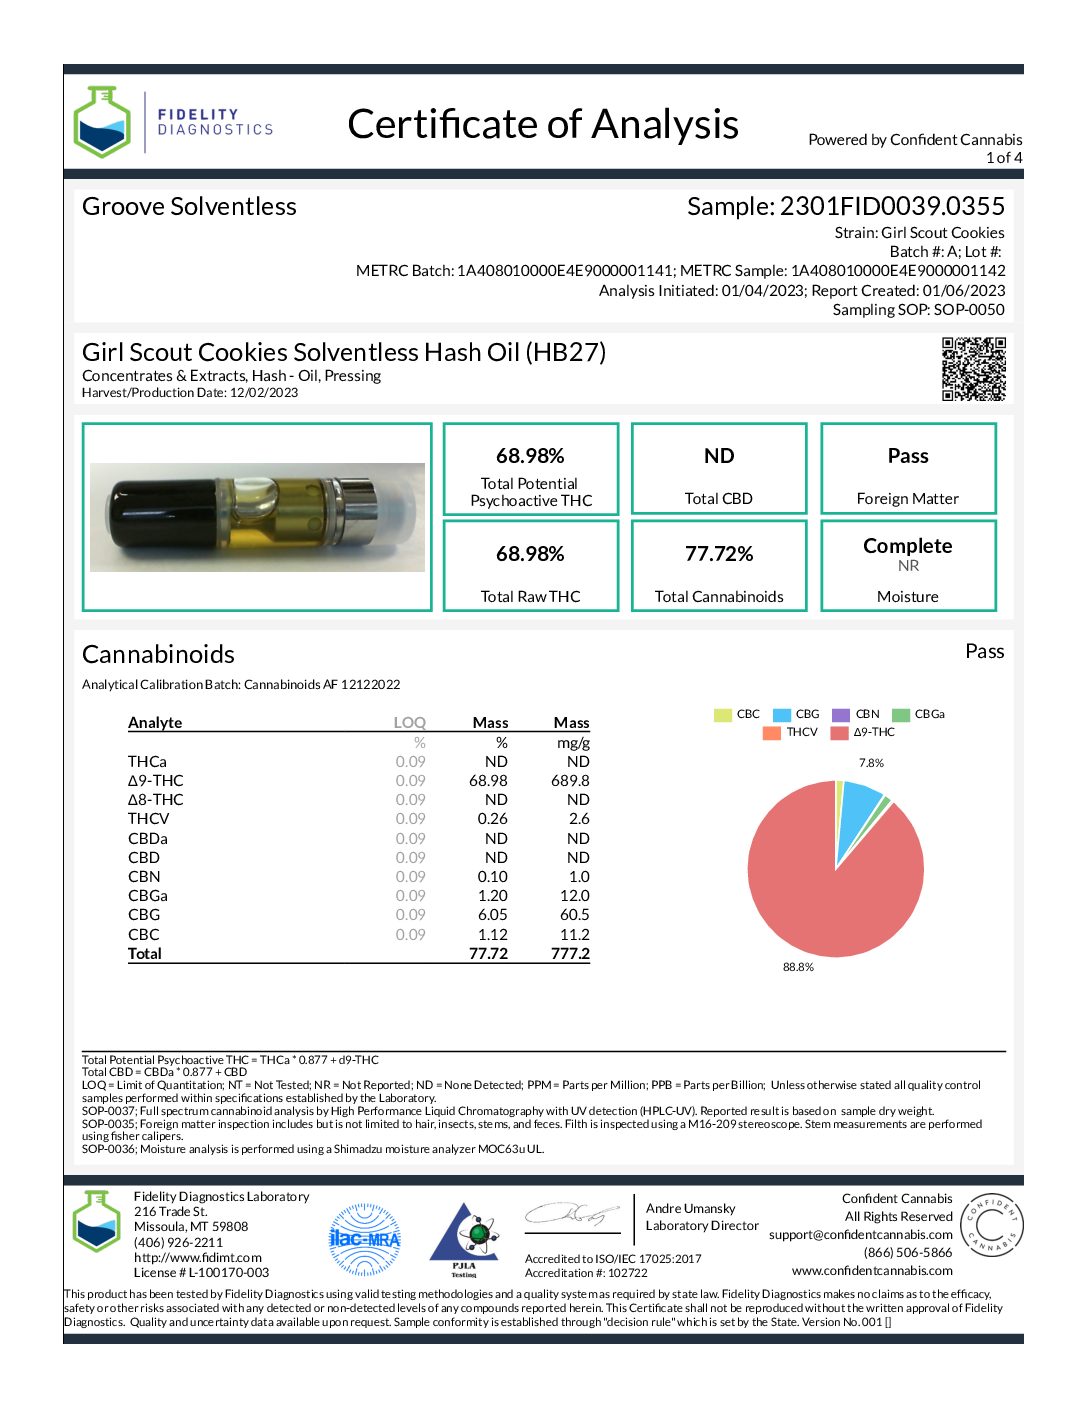 https://groovesolventless.com/wp-content/uploads/2023/01/Girl-Scout-Cookies-Solventless-Hash-Oil-HB27-pdf.jpg